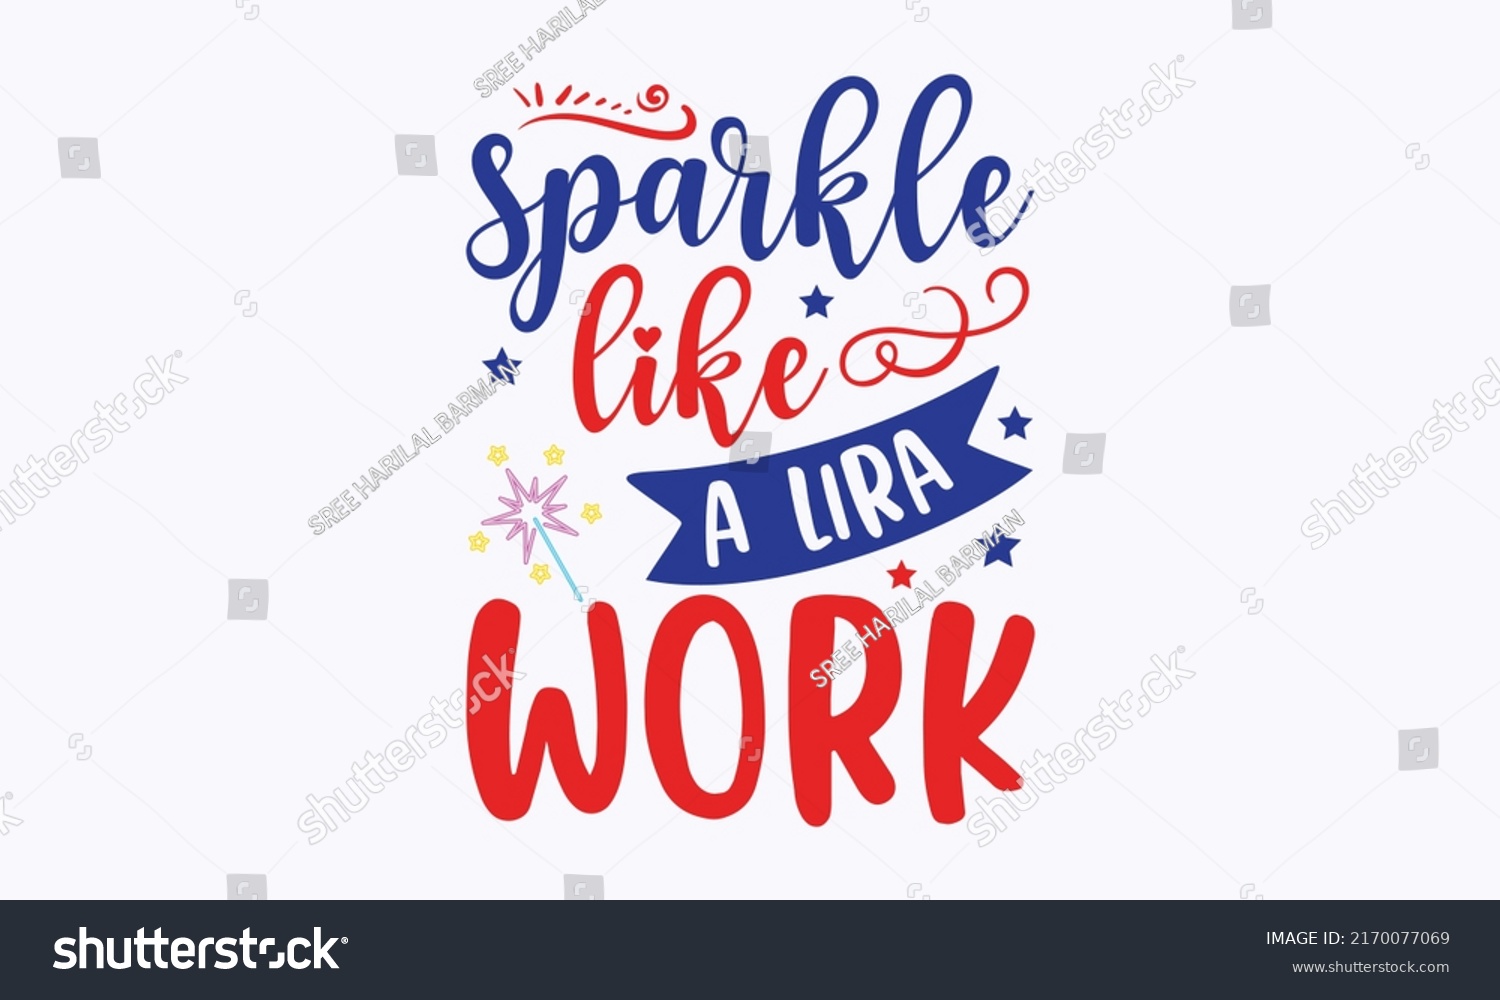 SVG of sparkle like a lira work - Happy Independence Day July 4 lettering design illustration. Patriotic rainbow shirt design. American rainbow svg file for cutting. Independence Day Cut Files. templet svg